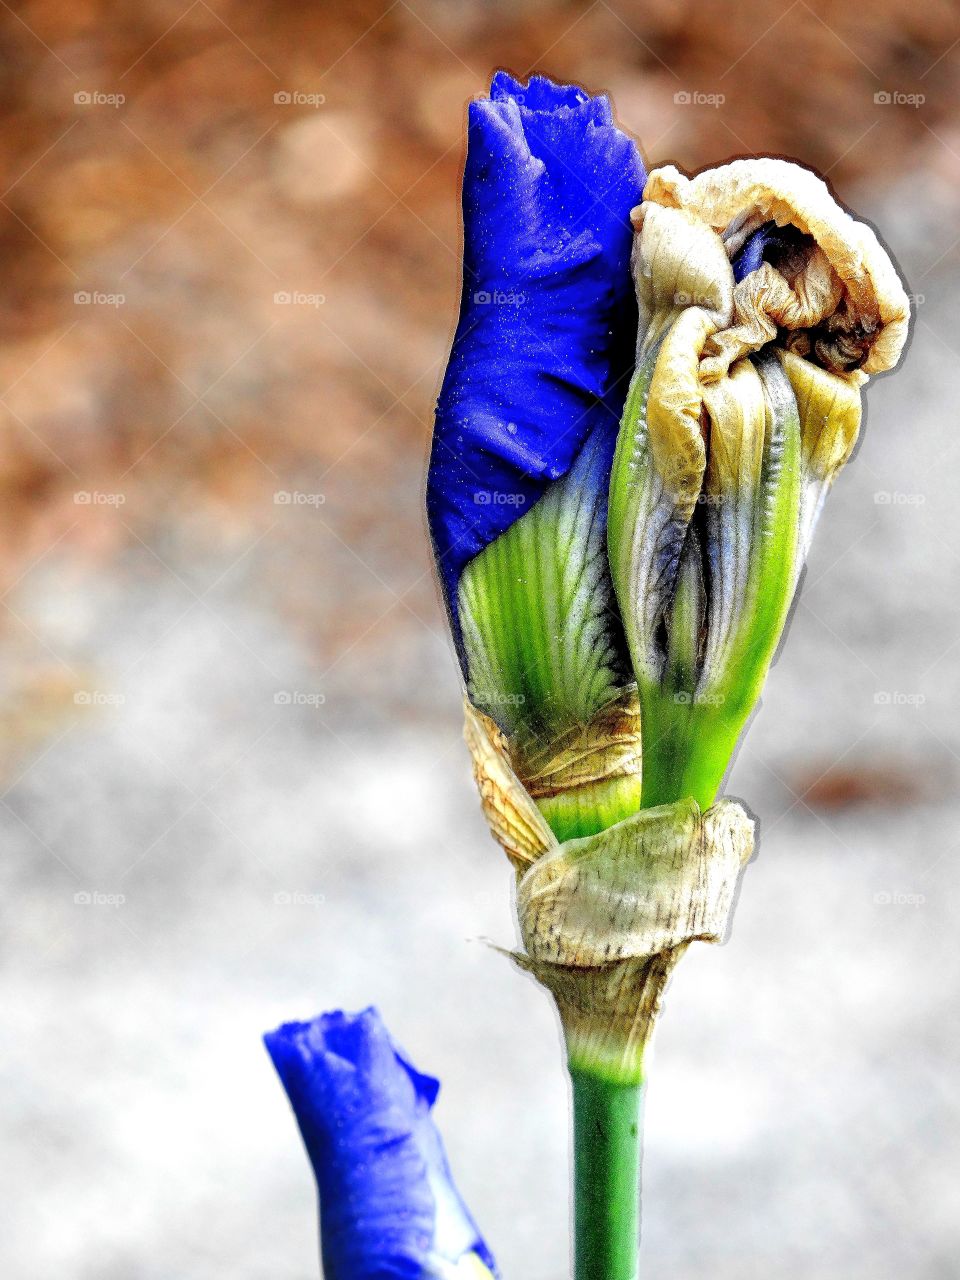 blue iris unfurls. Several blue iris buds in various degrees of unfurling their leaves and letting their glorious blue color into the world for all to enjoy!